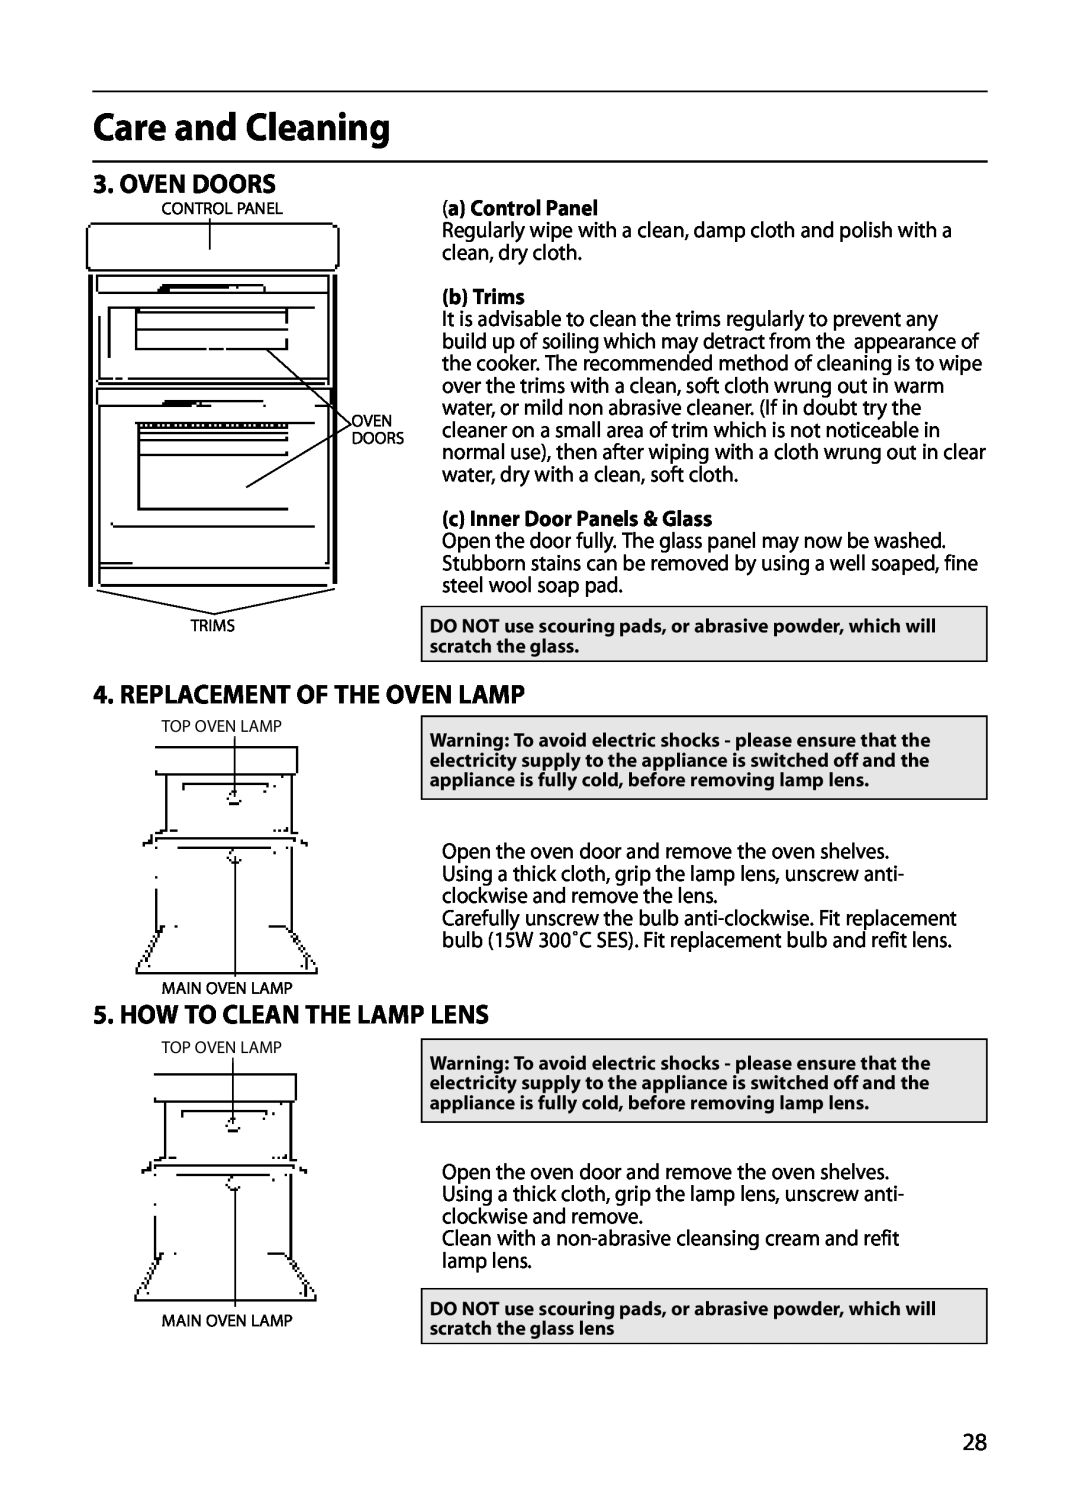 Hotpoint S420E Care and Cleaning, Oven Doors, Replacement Of The Oven Lamp, How To Clean The Lamp Lens, a Control Panel 